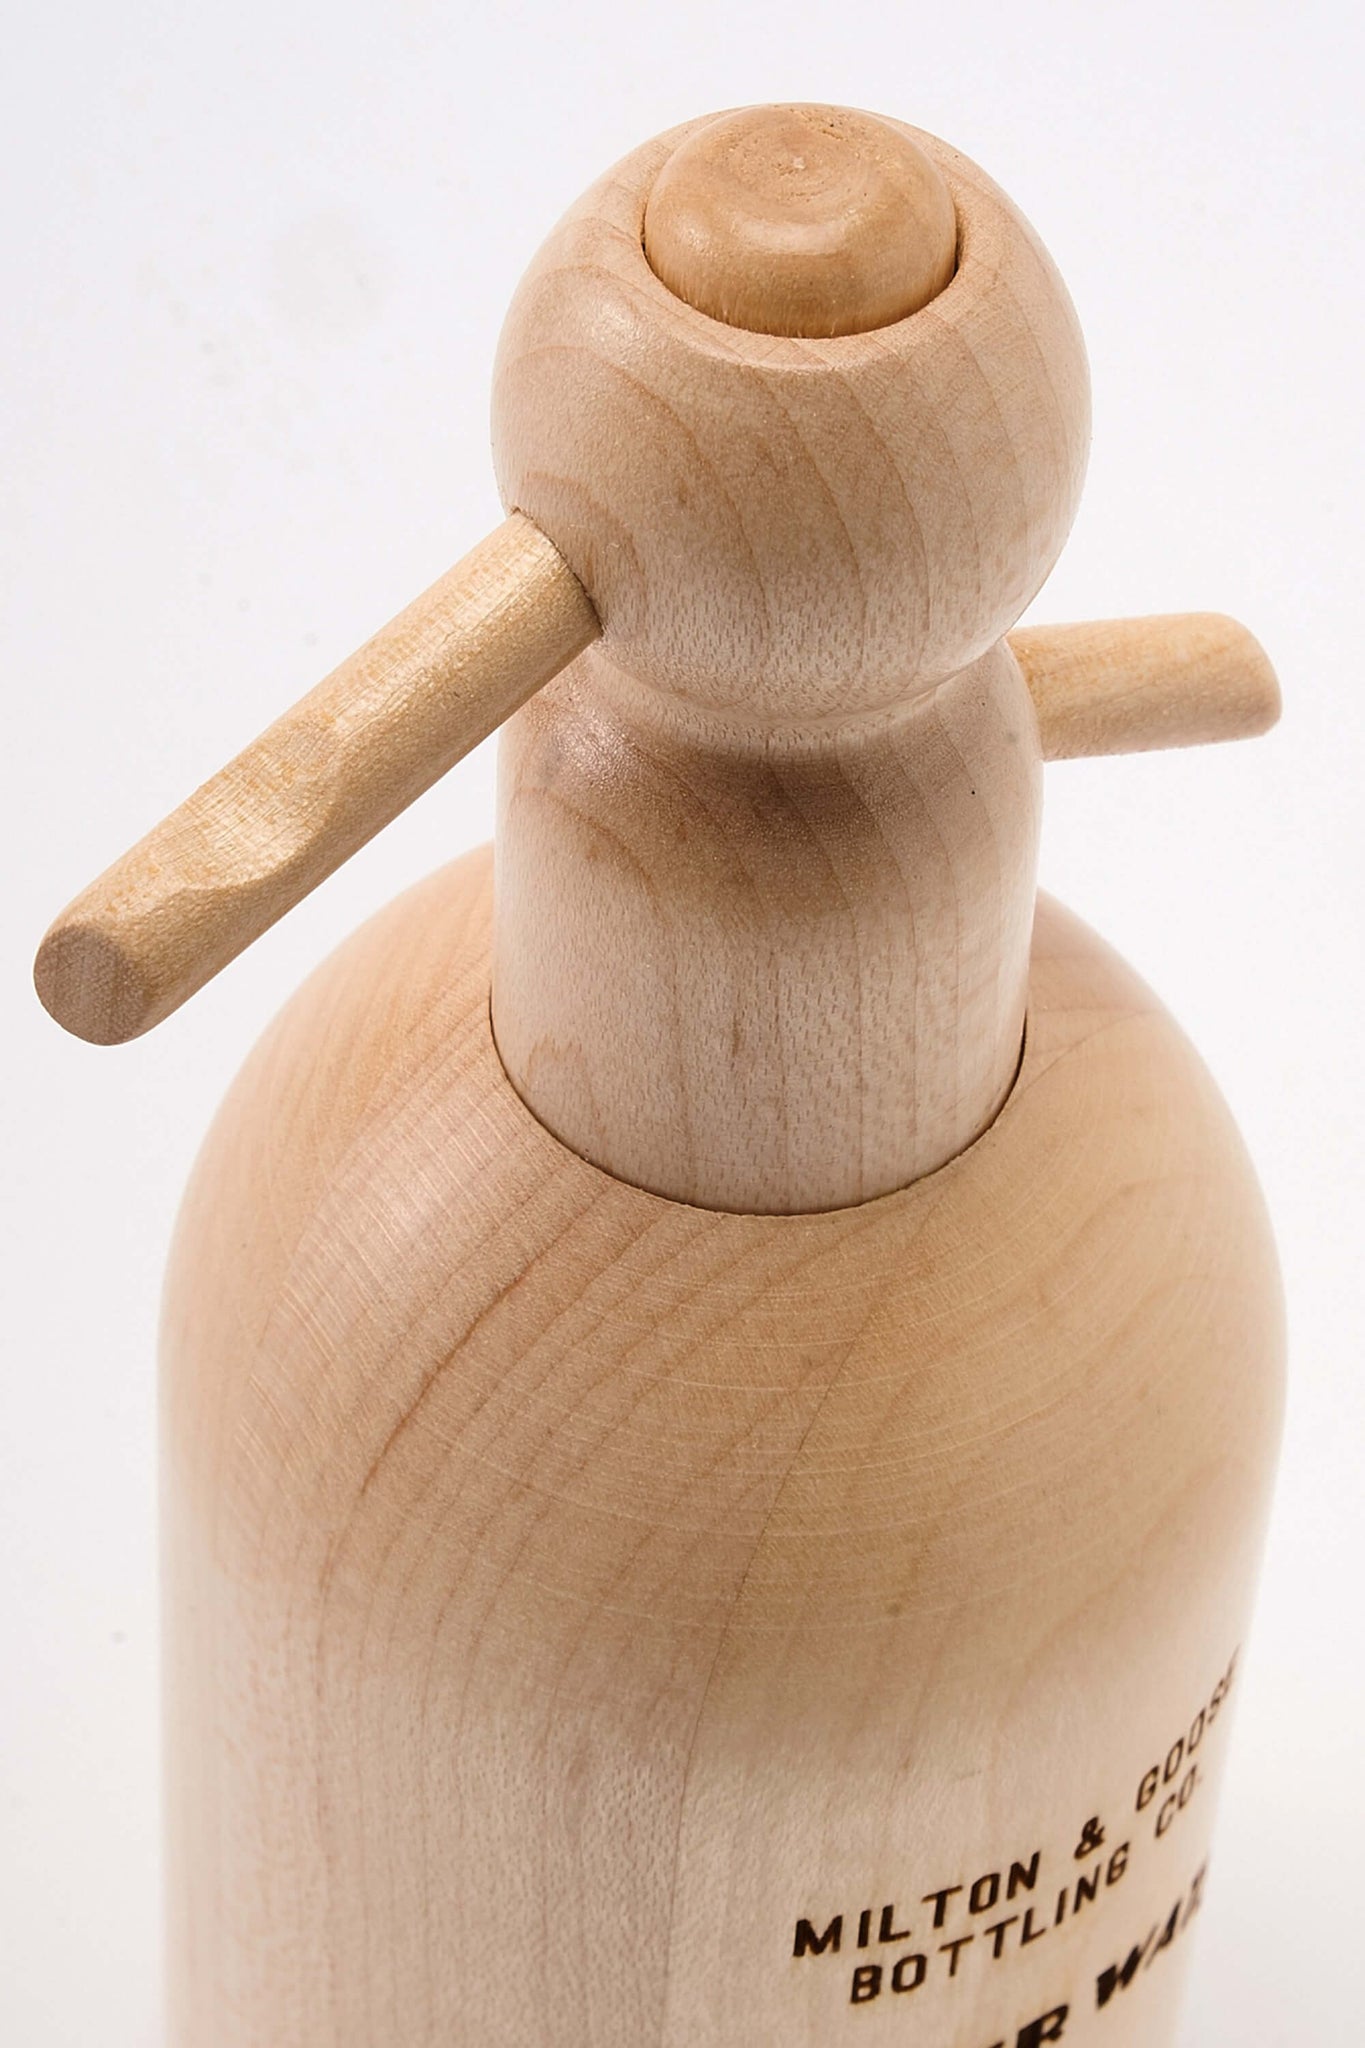 Close up of wooden seltzer bottle toy by Milton & Goose. Image is focused on the top push button and spout.